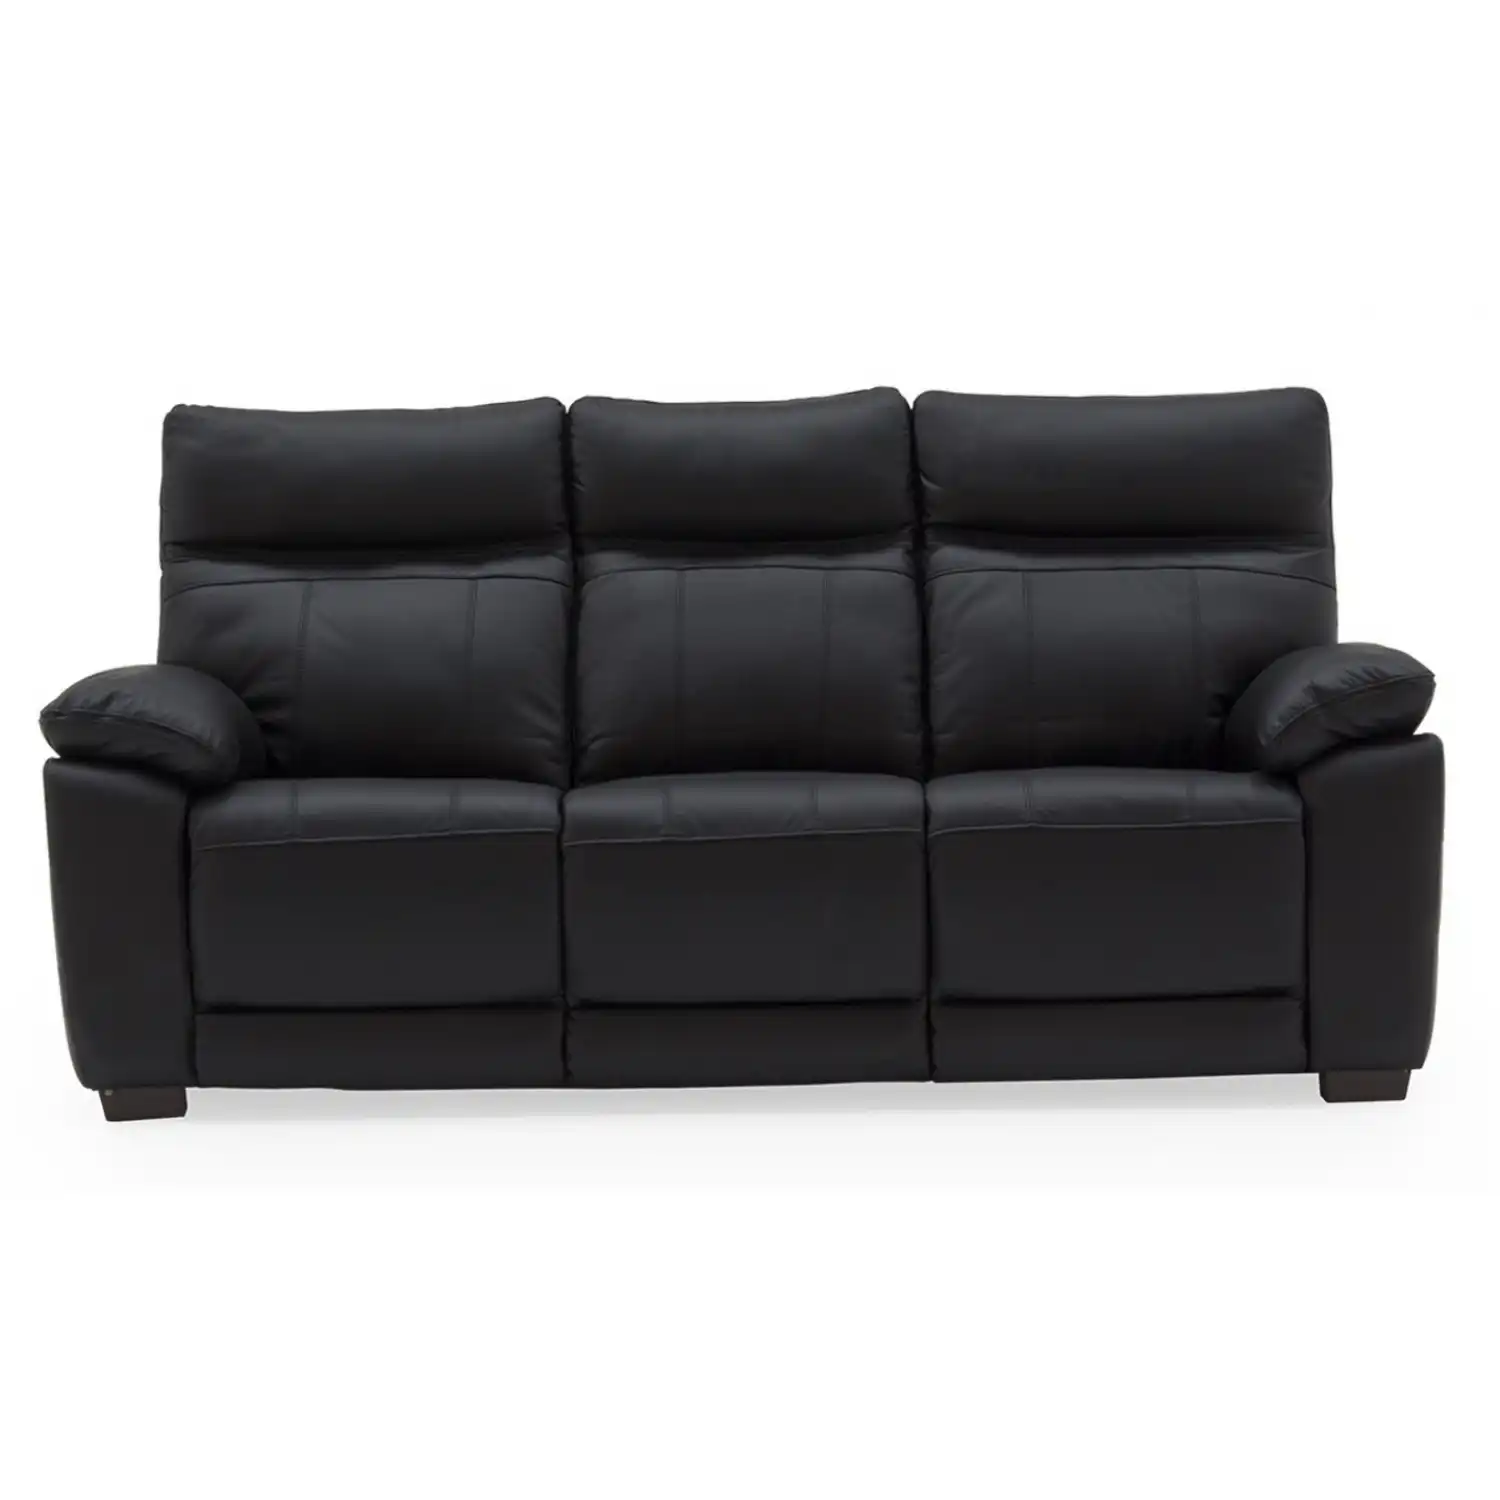 Black Leather 3 Seater Fixed Sofa with Arm Pads